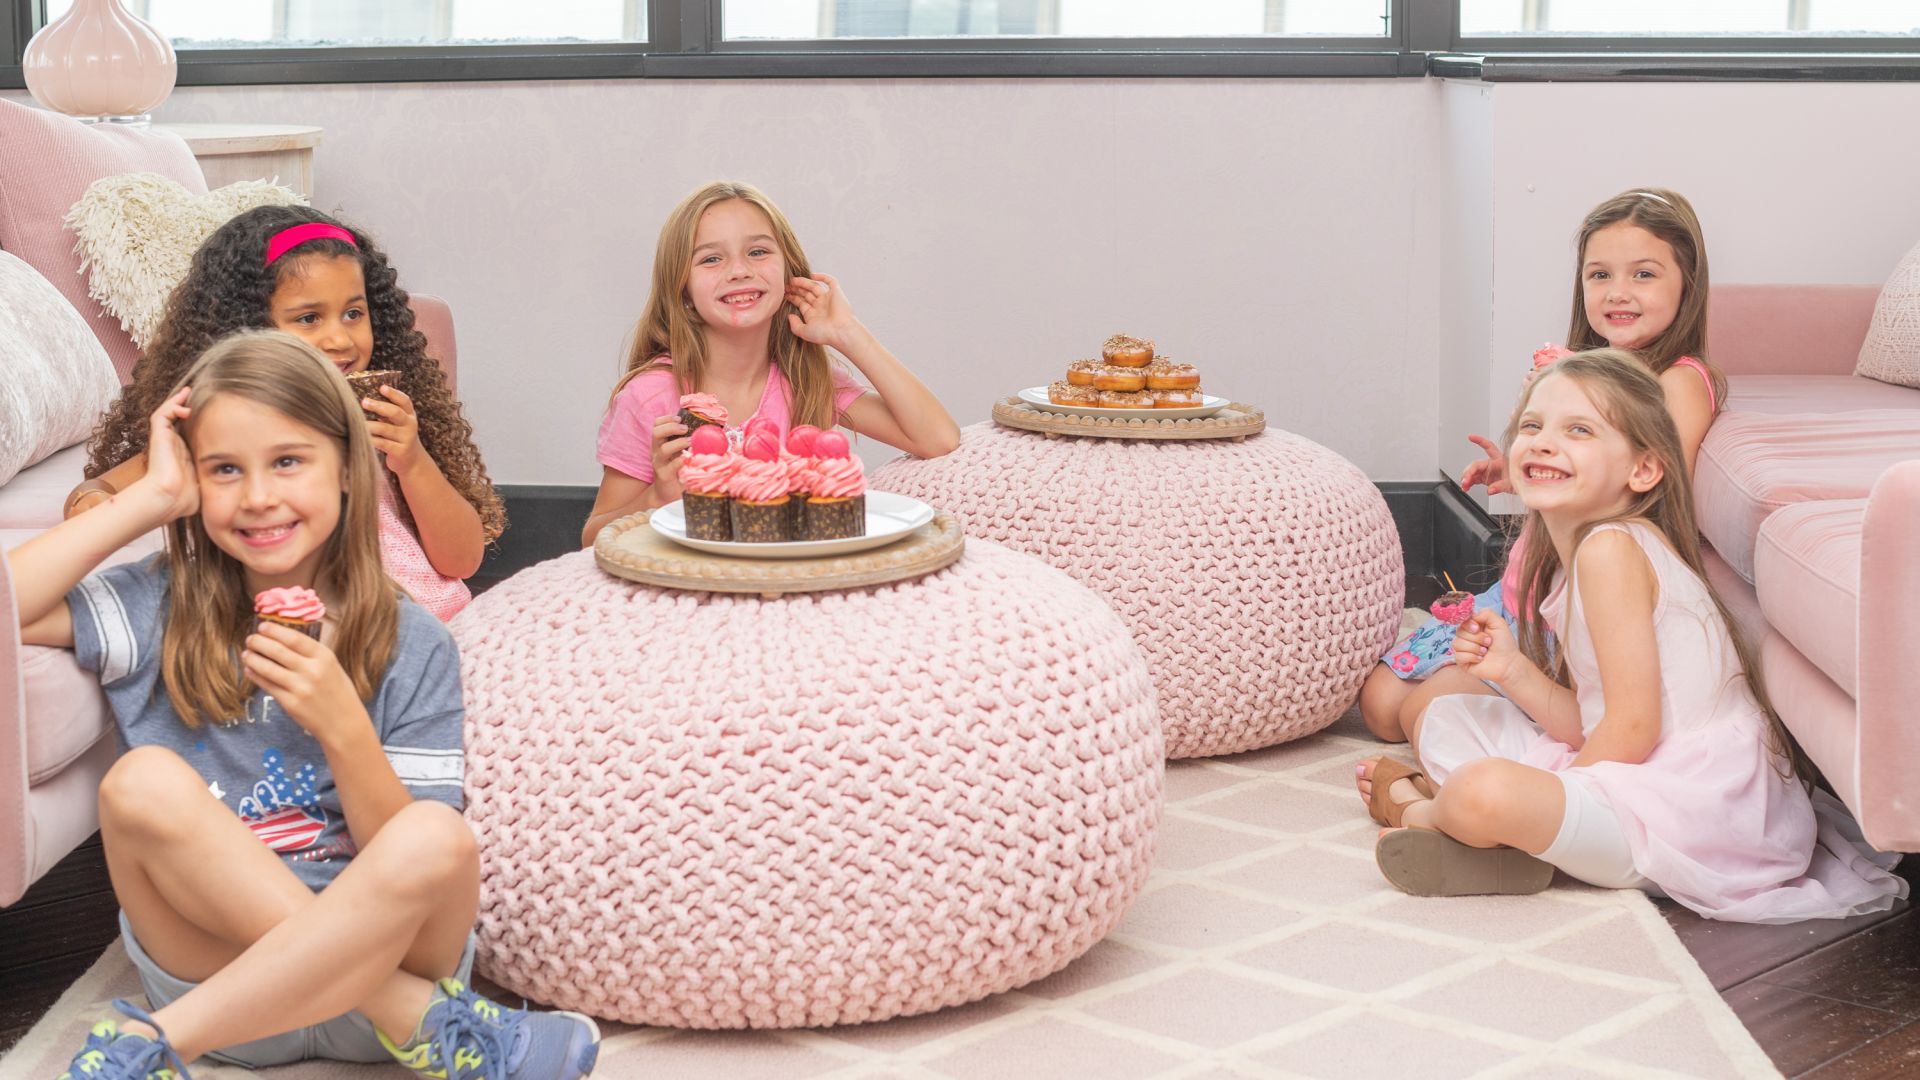 A Group Of Girls Sitting On A Couch With A Cake